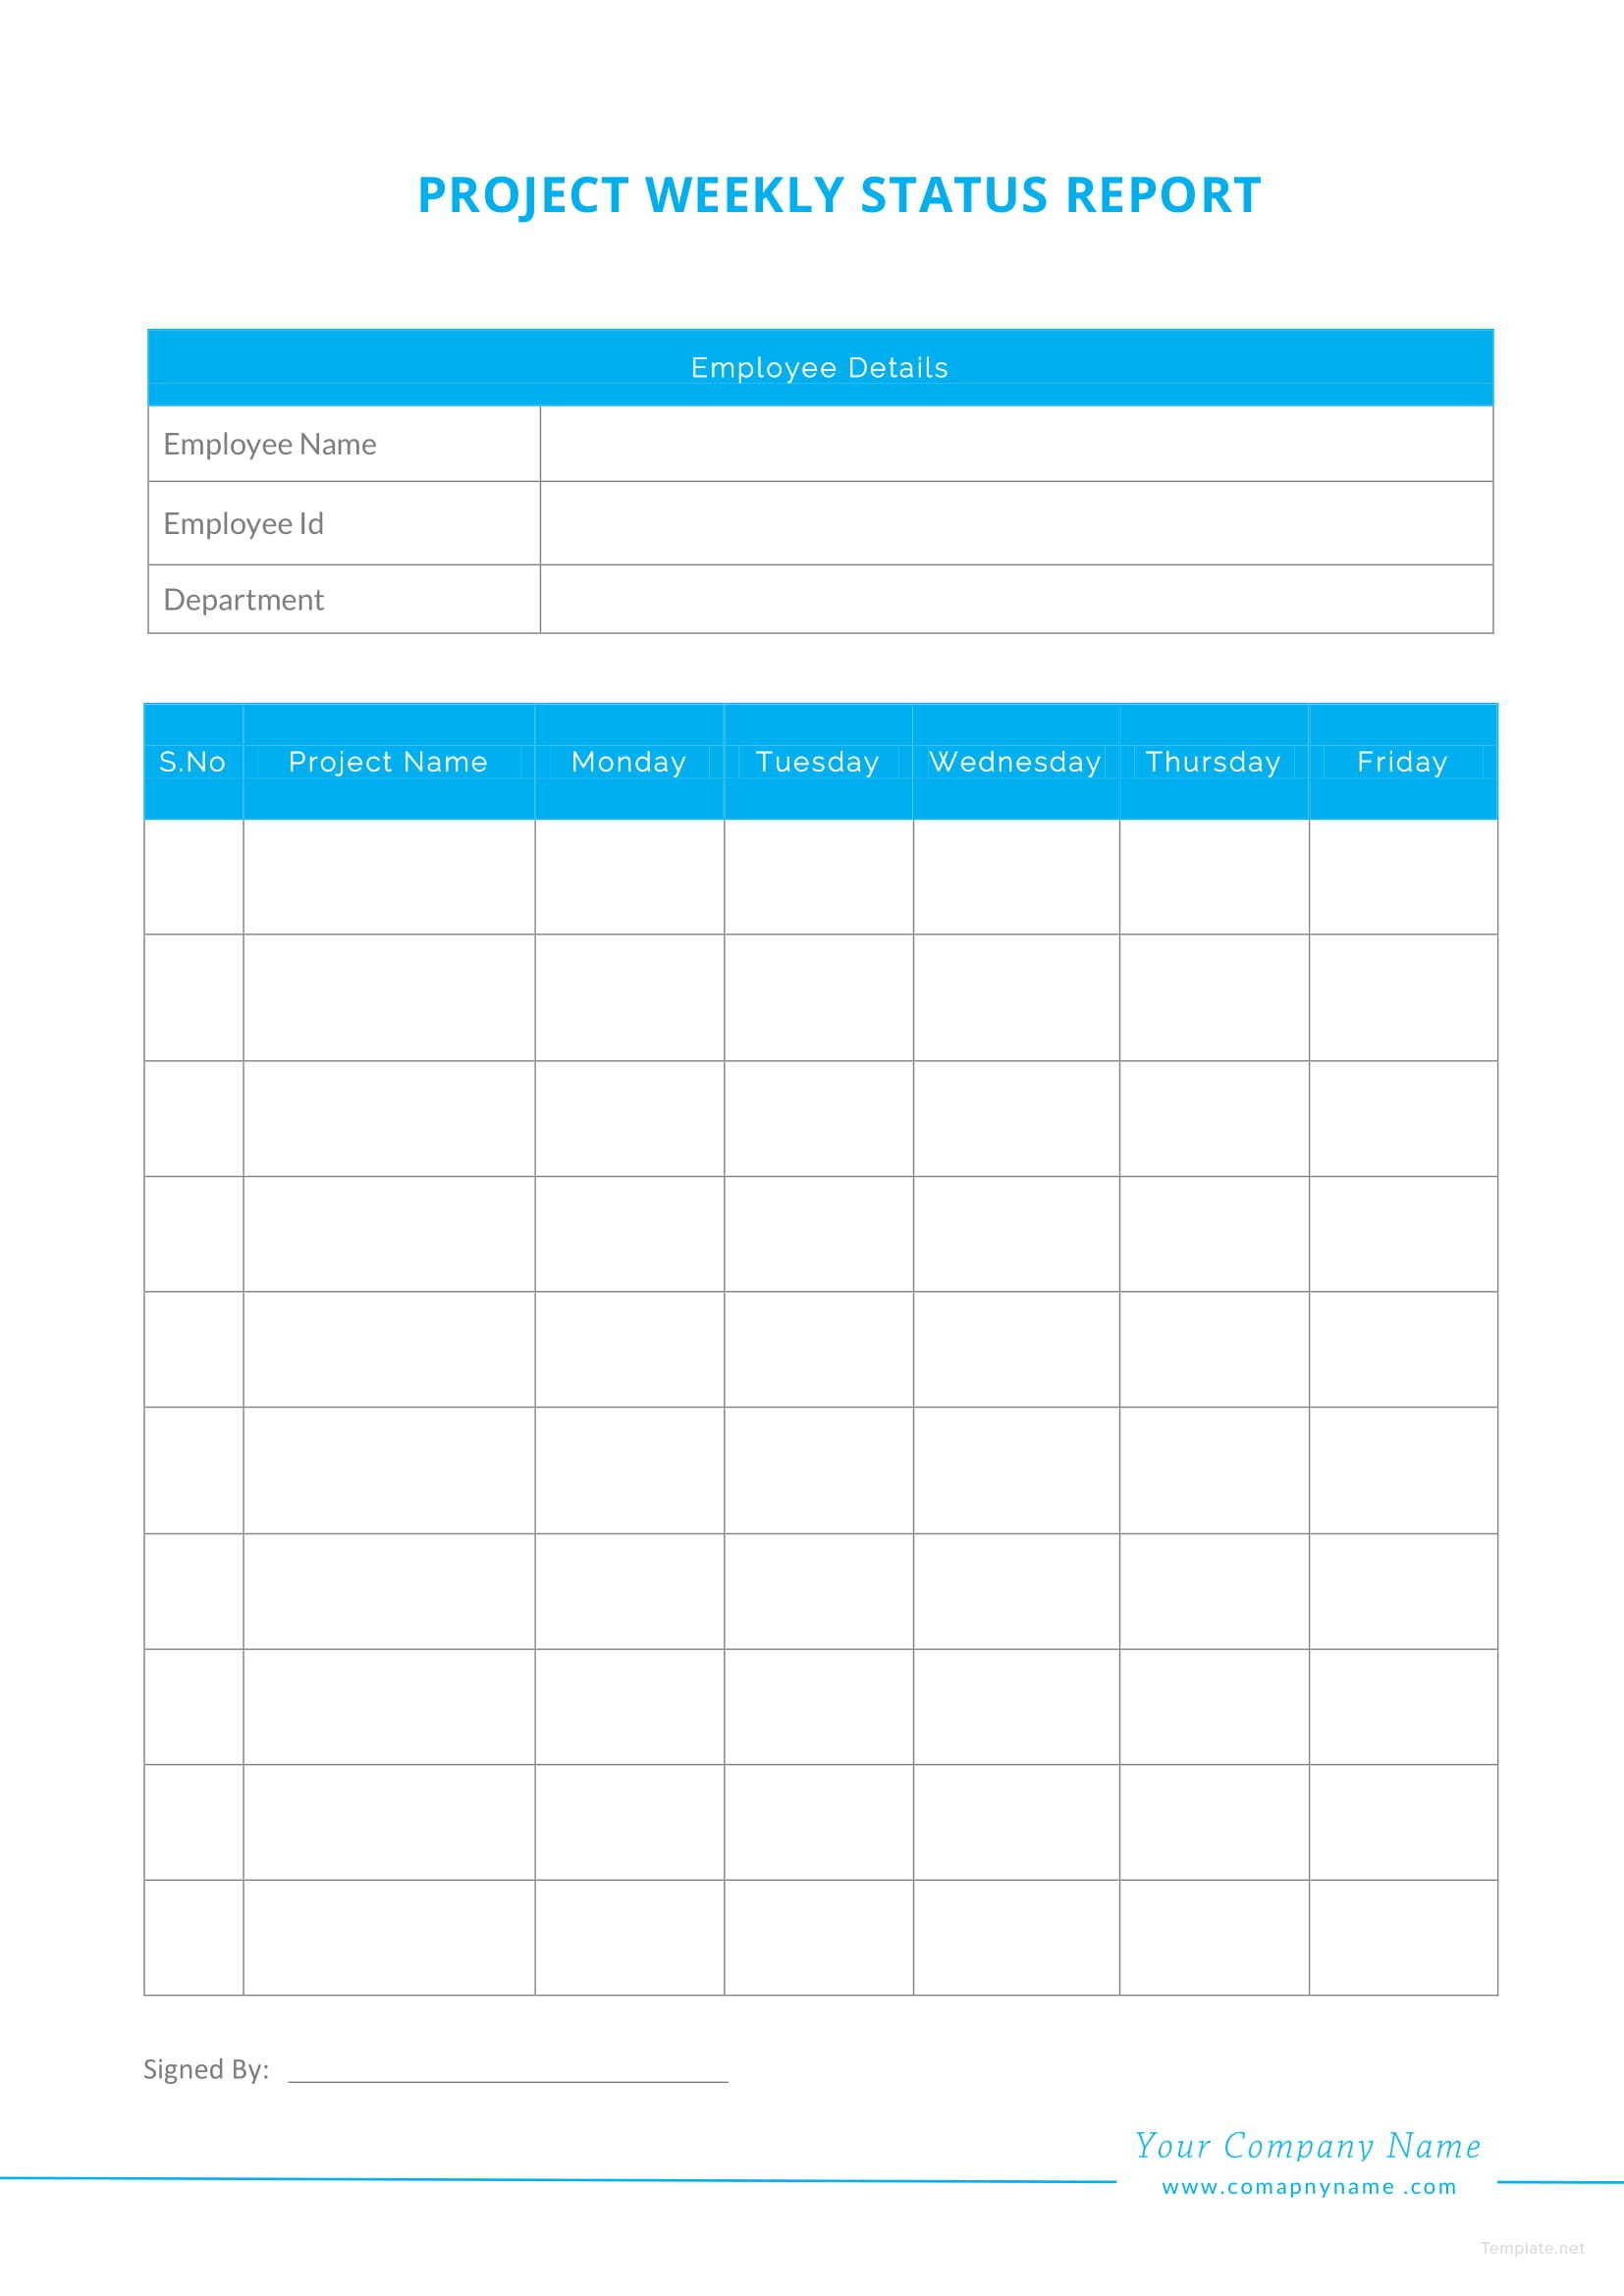 blank-weekly-project-status-report-template-in-microsoft-word